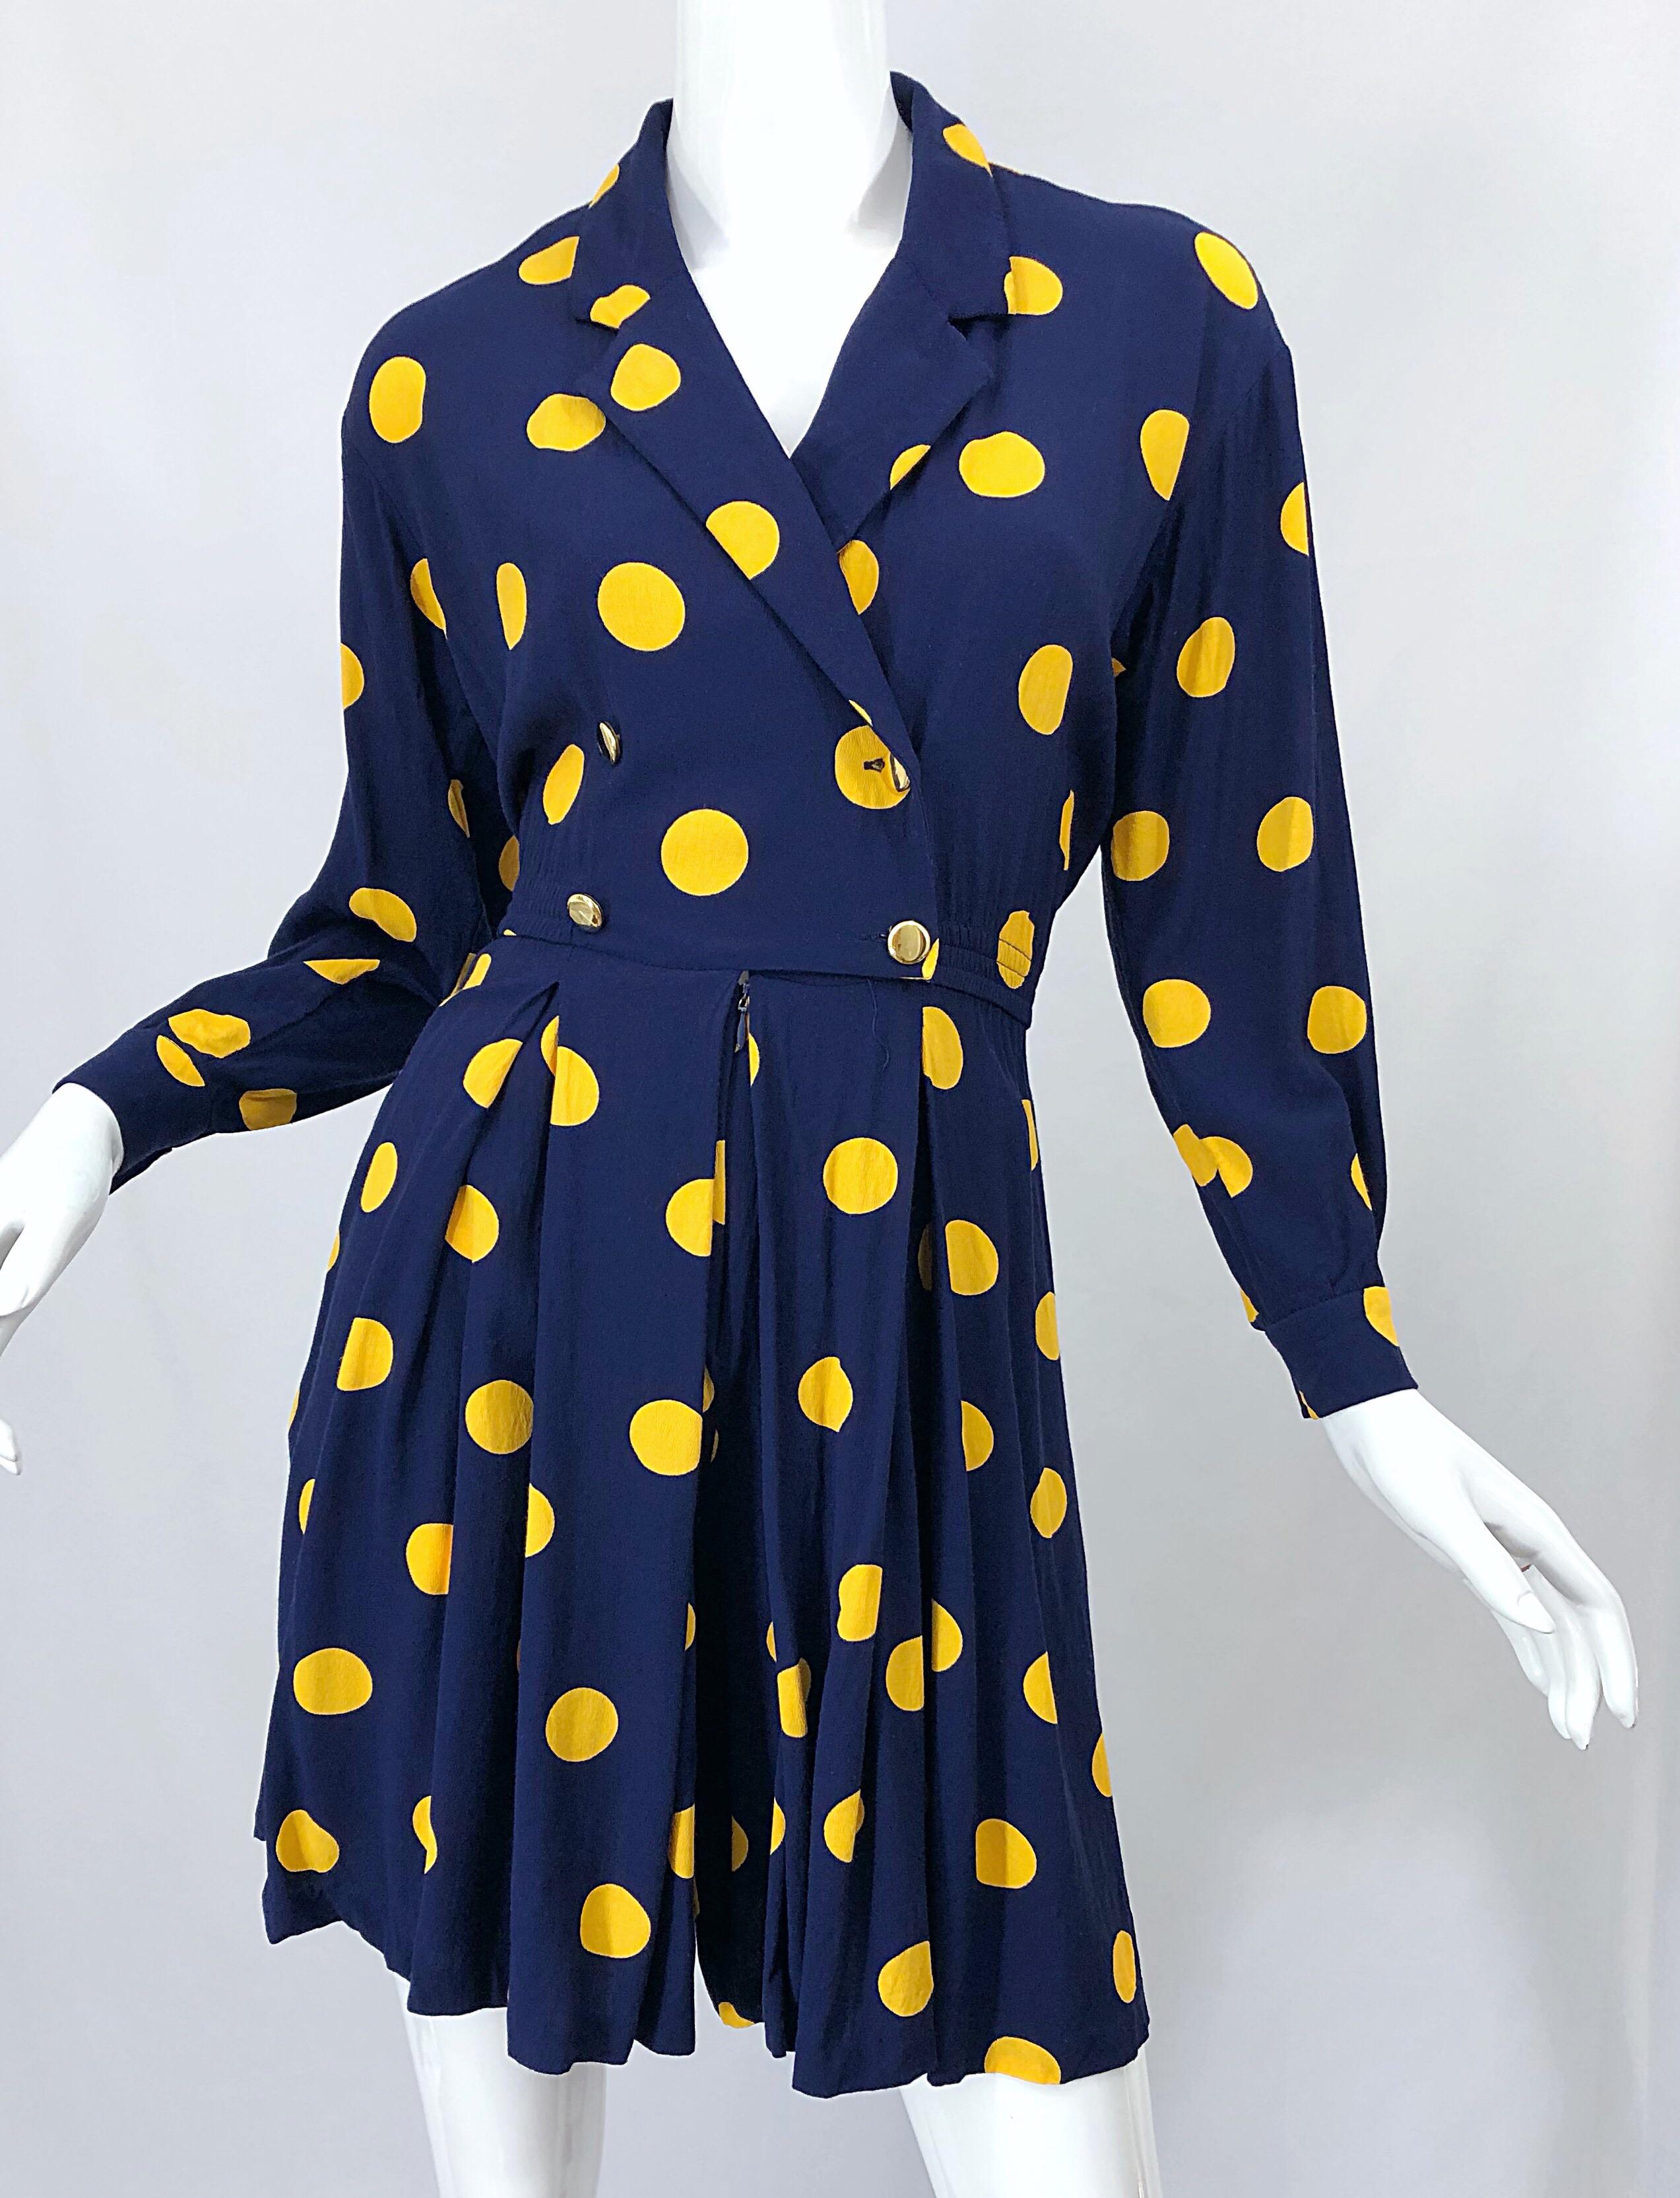 Size 8 Romper Late 1980s Navy Blue and Yellow Polka Dot 80s Vintage Romper 1